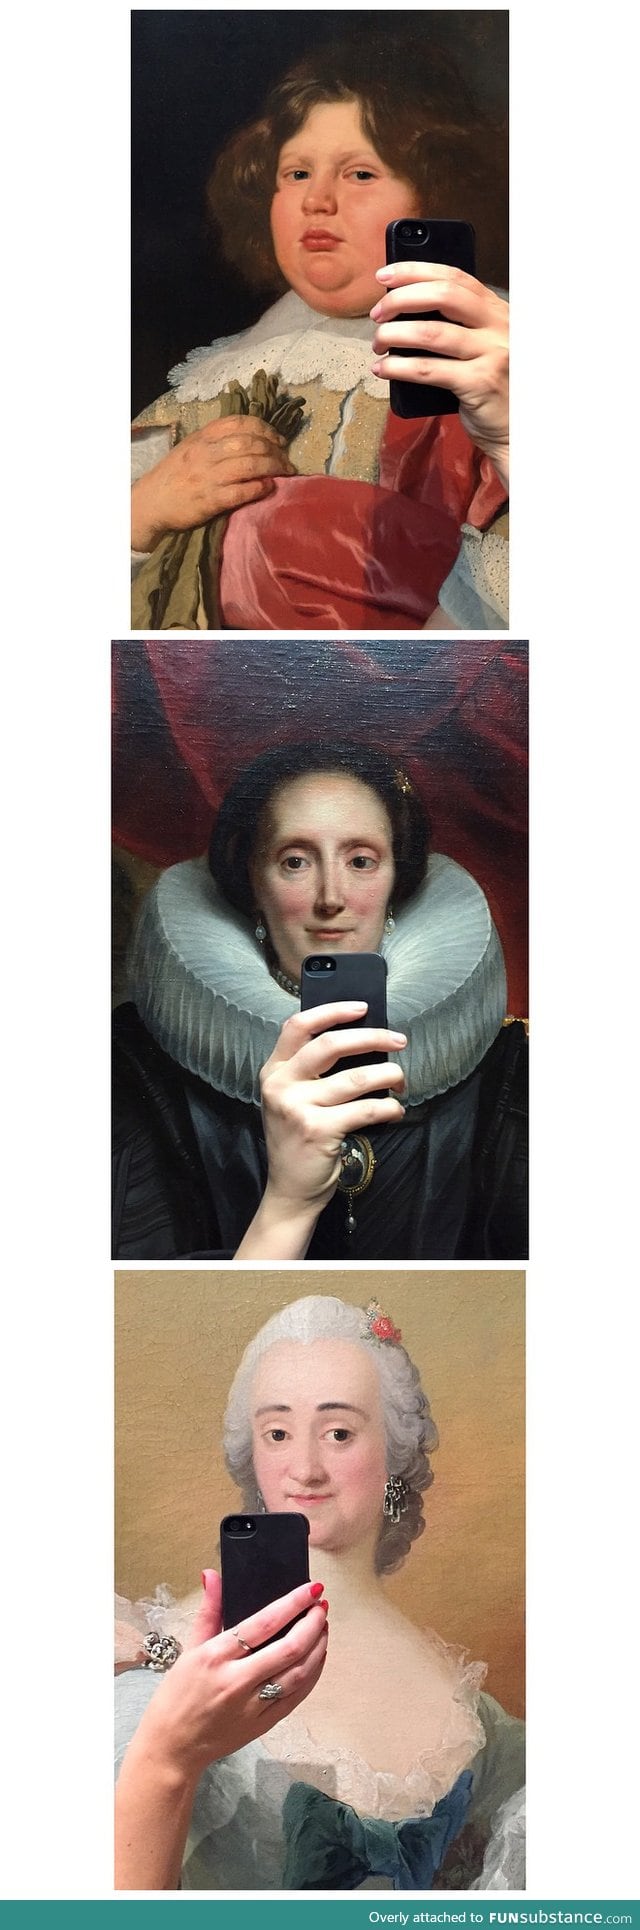 My friend went to the museum and made art of the selfie